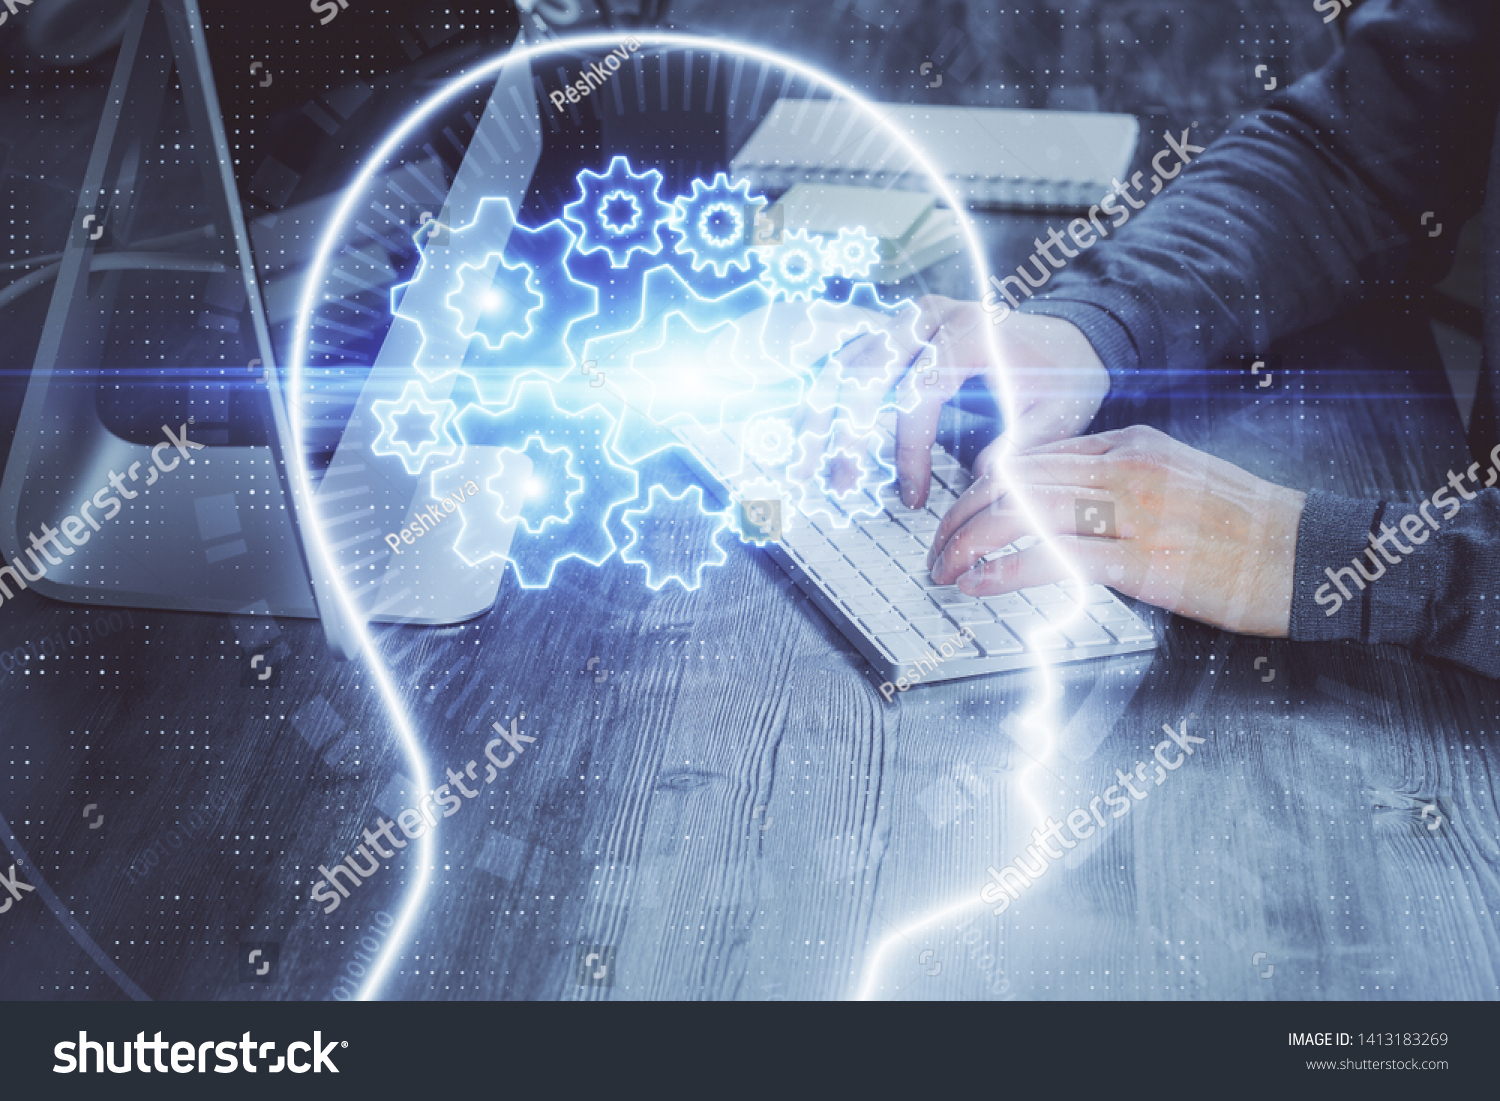 Man typing on keyboard background with brain hologram. Concept of big Data. Double exposure. #1413183269